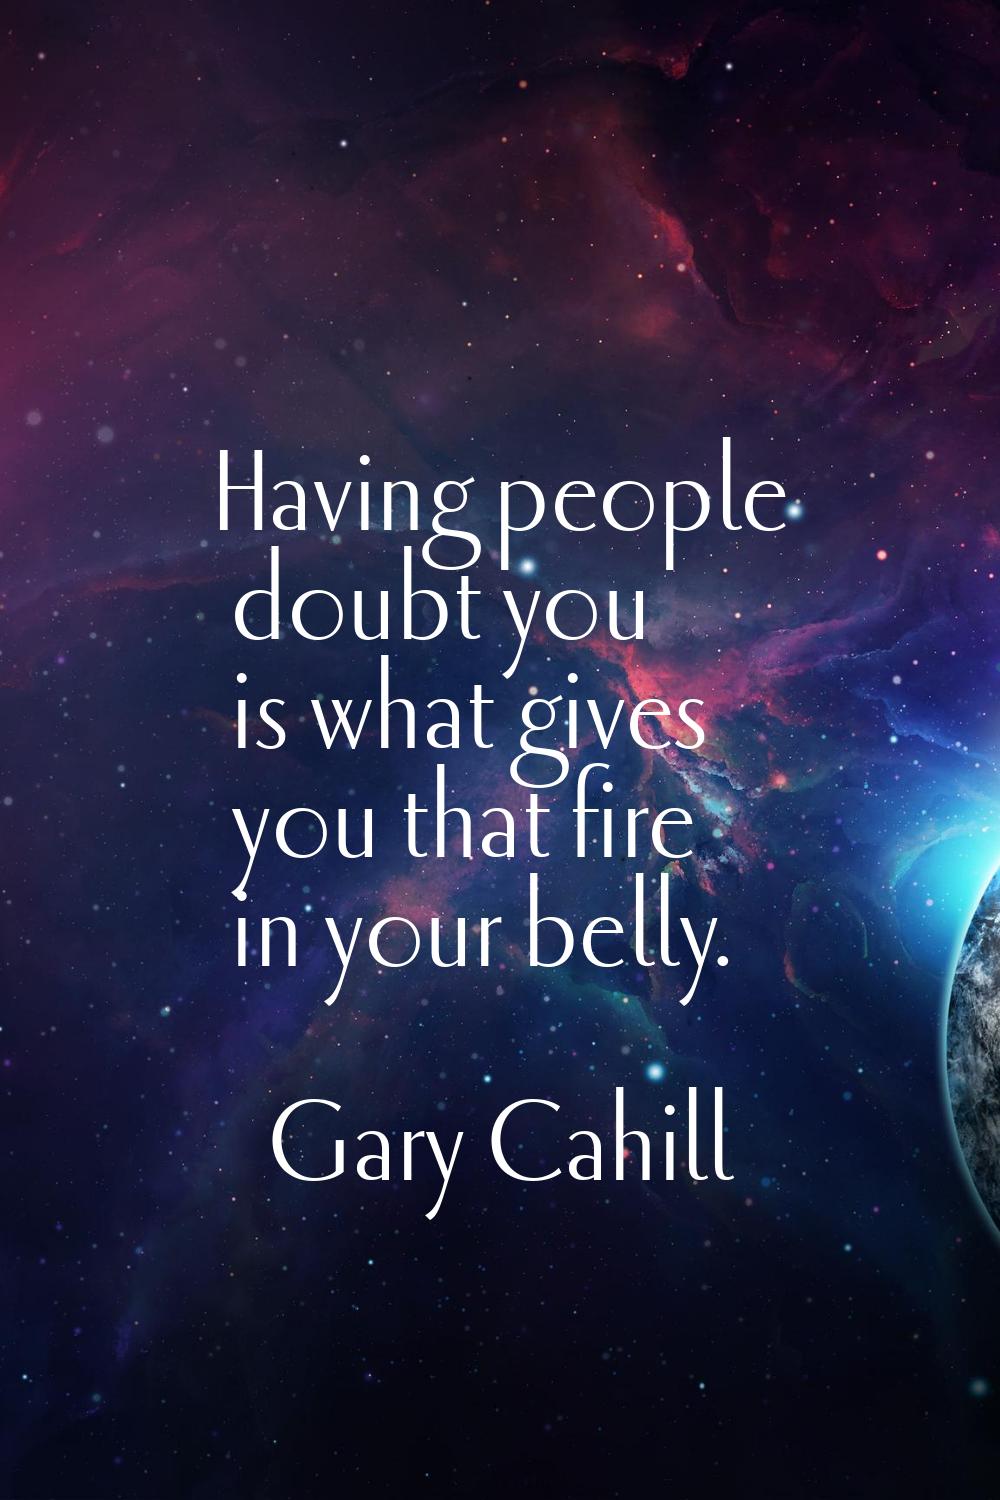 Having people doubt you is what gives you that fire in your belly.